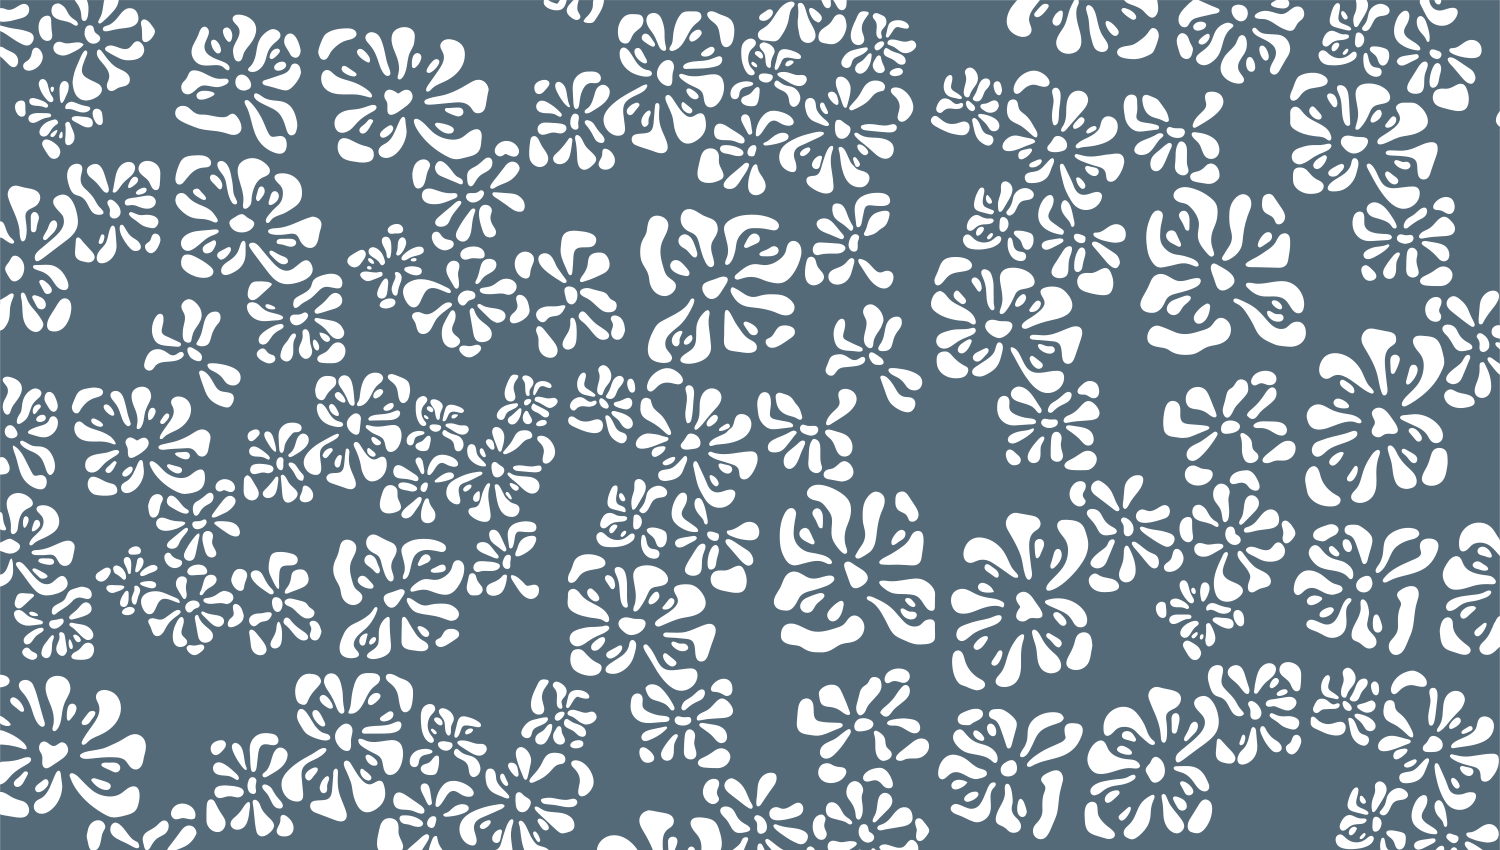 Parasoleil™ Magnolia© pattern displayed with a blue color overlay